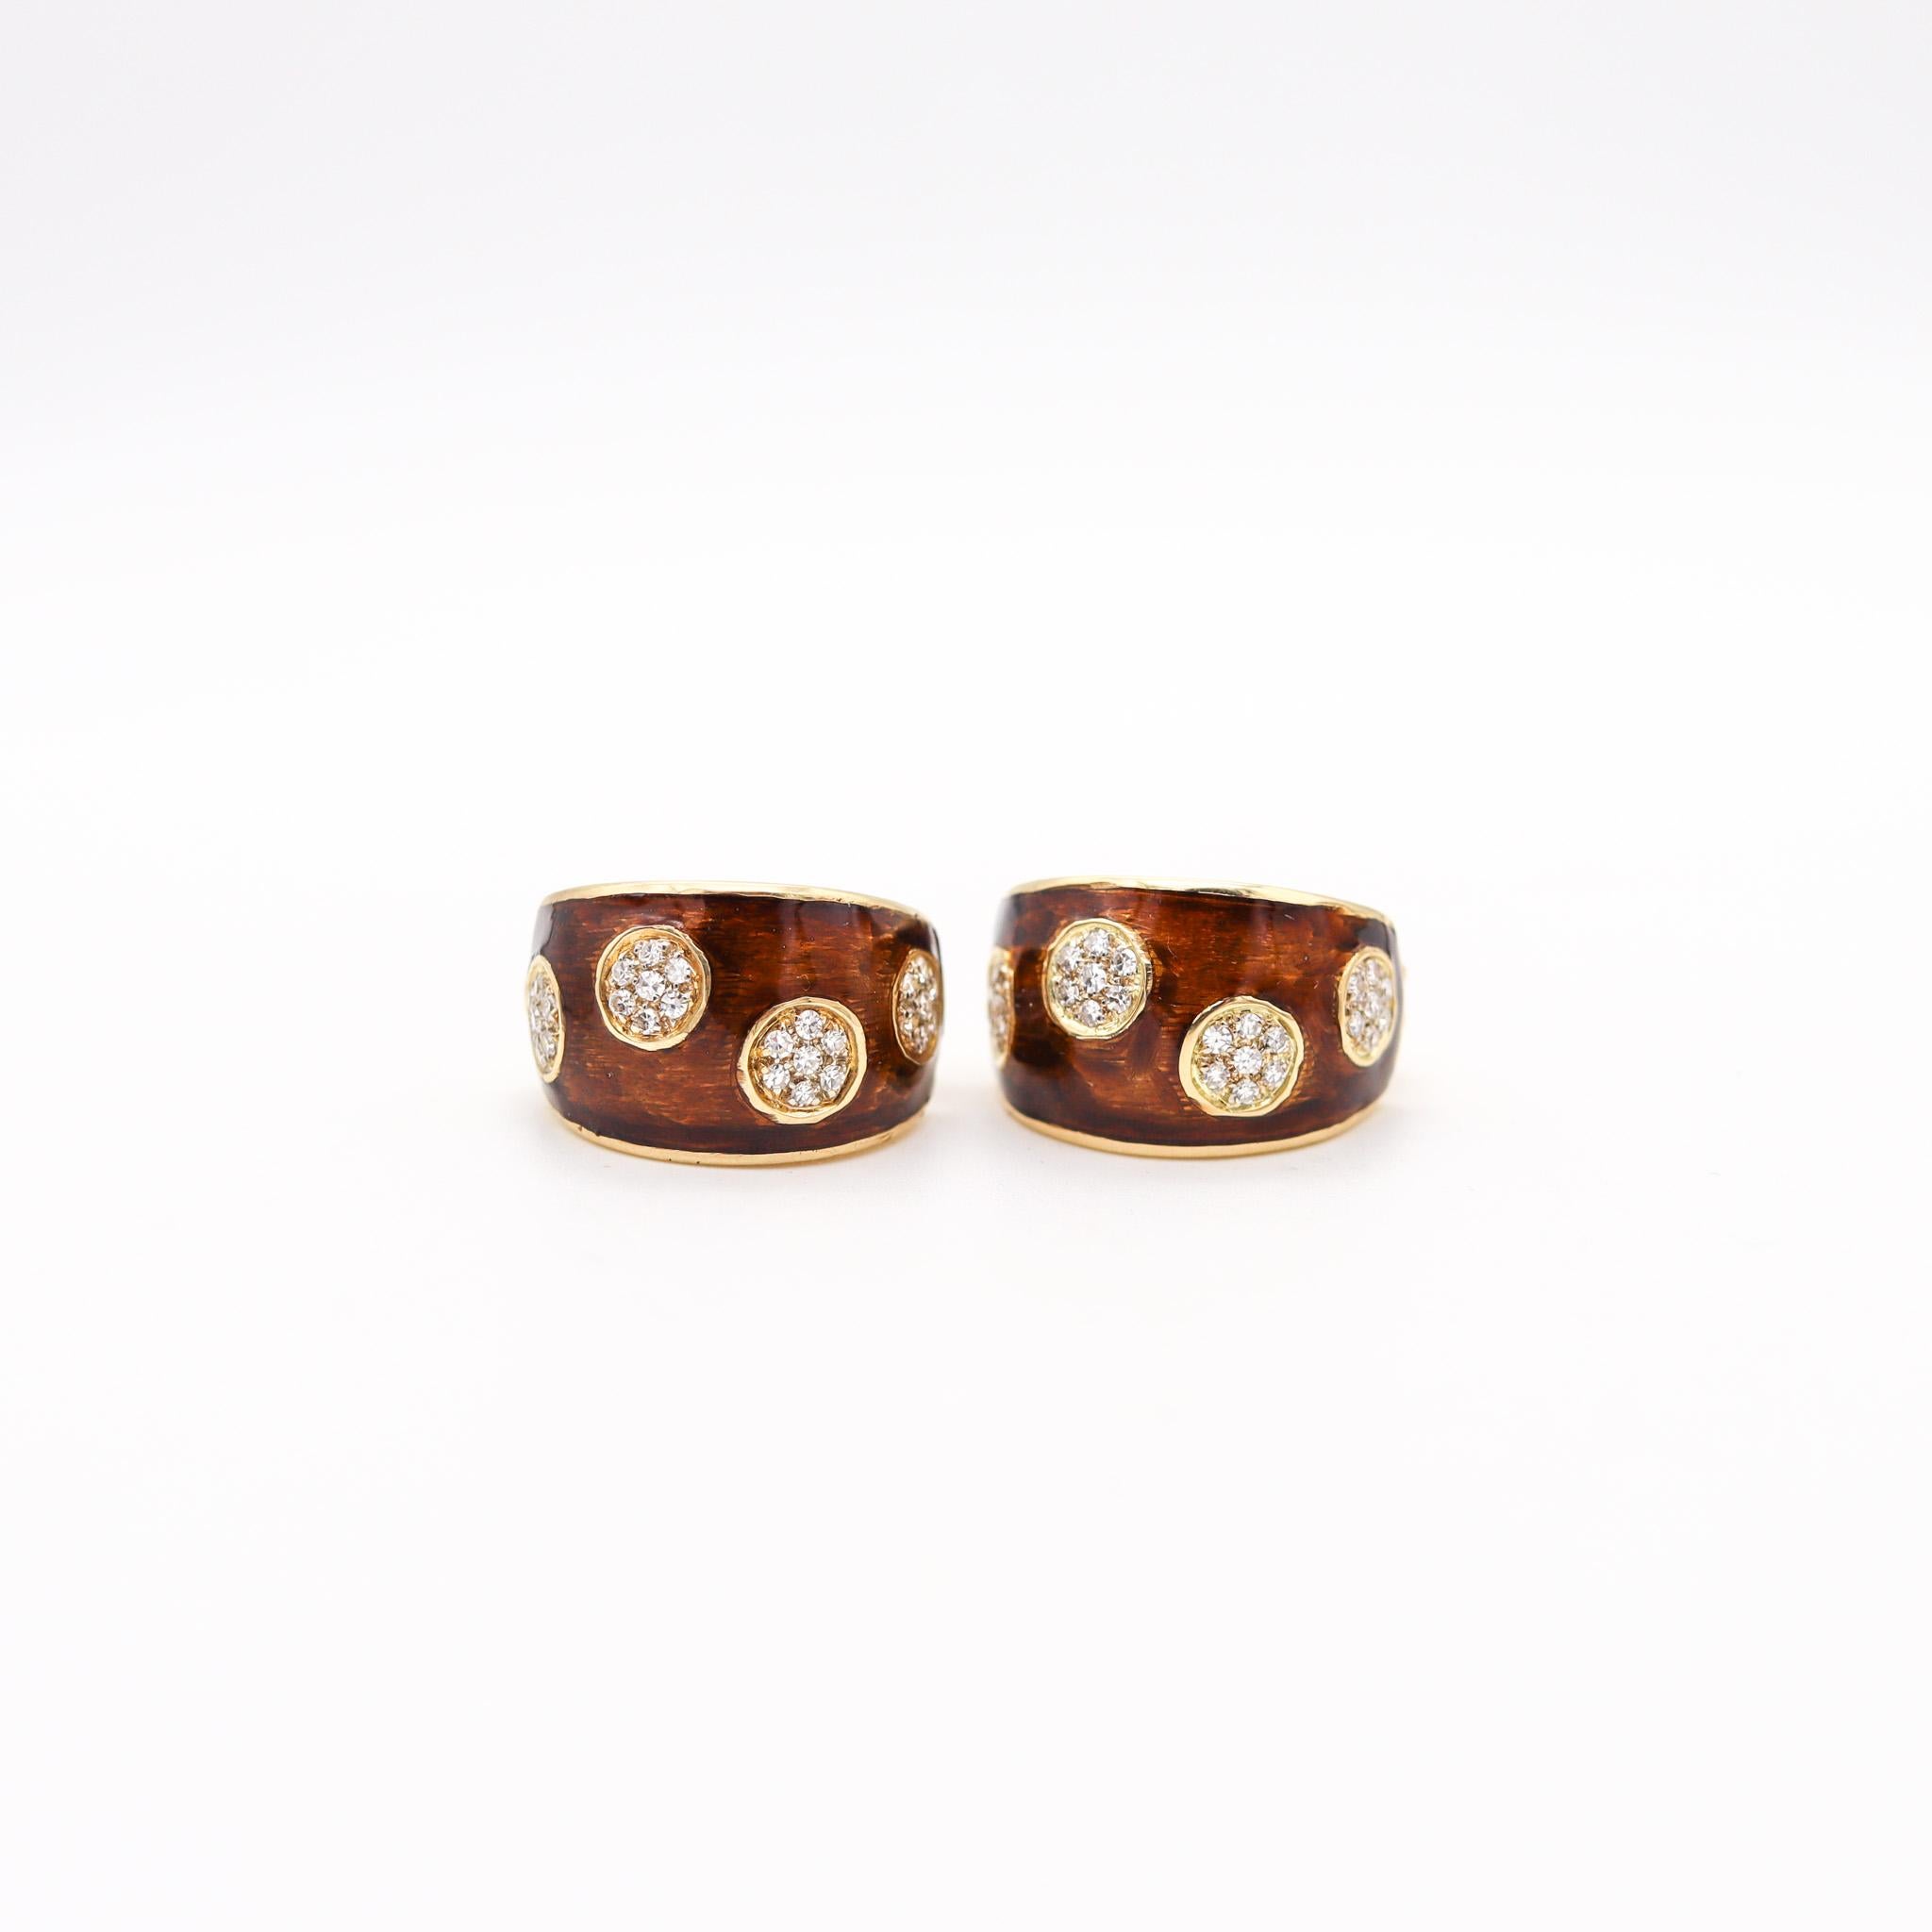 Modernist Van Cleef & Arpels 1970 Enameled Earrings In 18Kt Gold With 1.68 Ctw in Diamonds For Sale